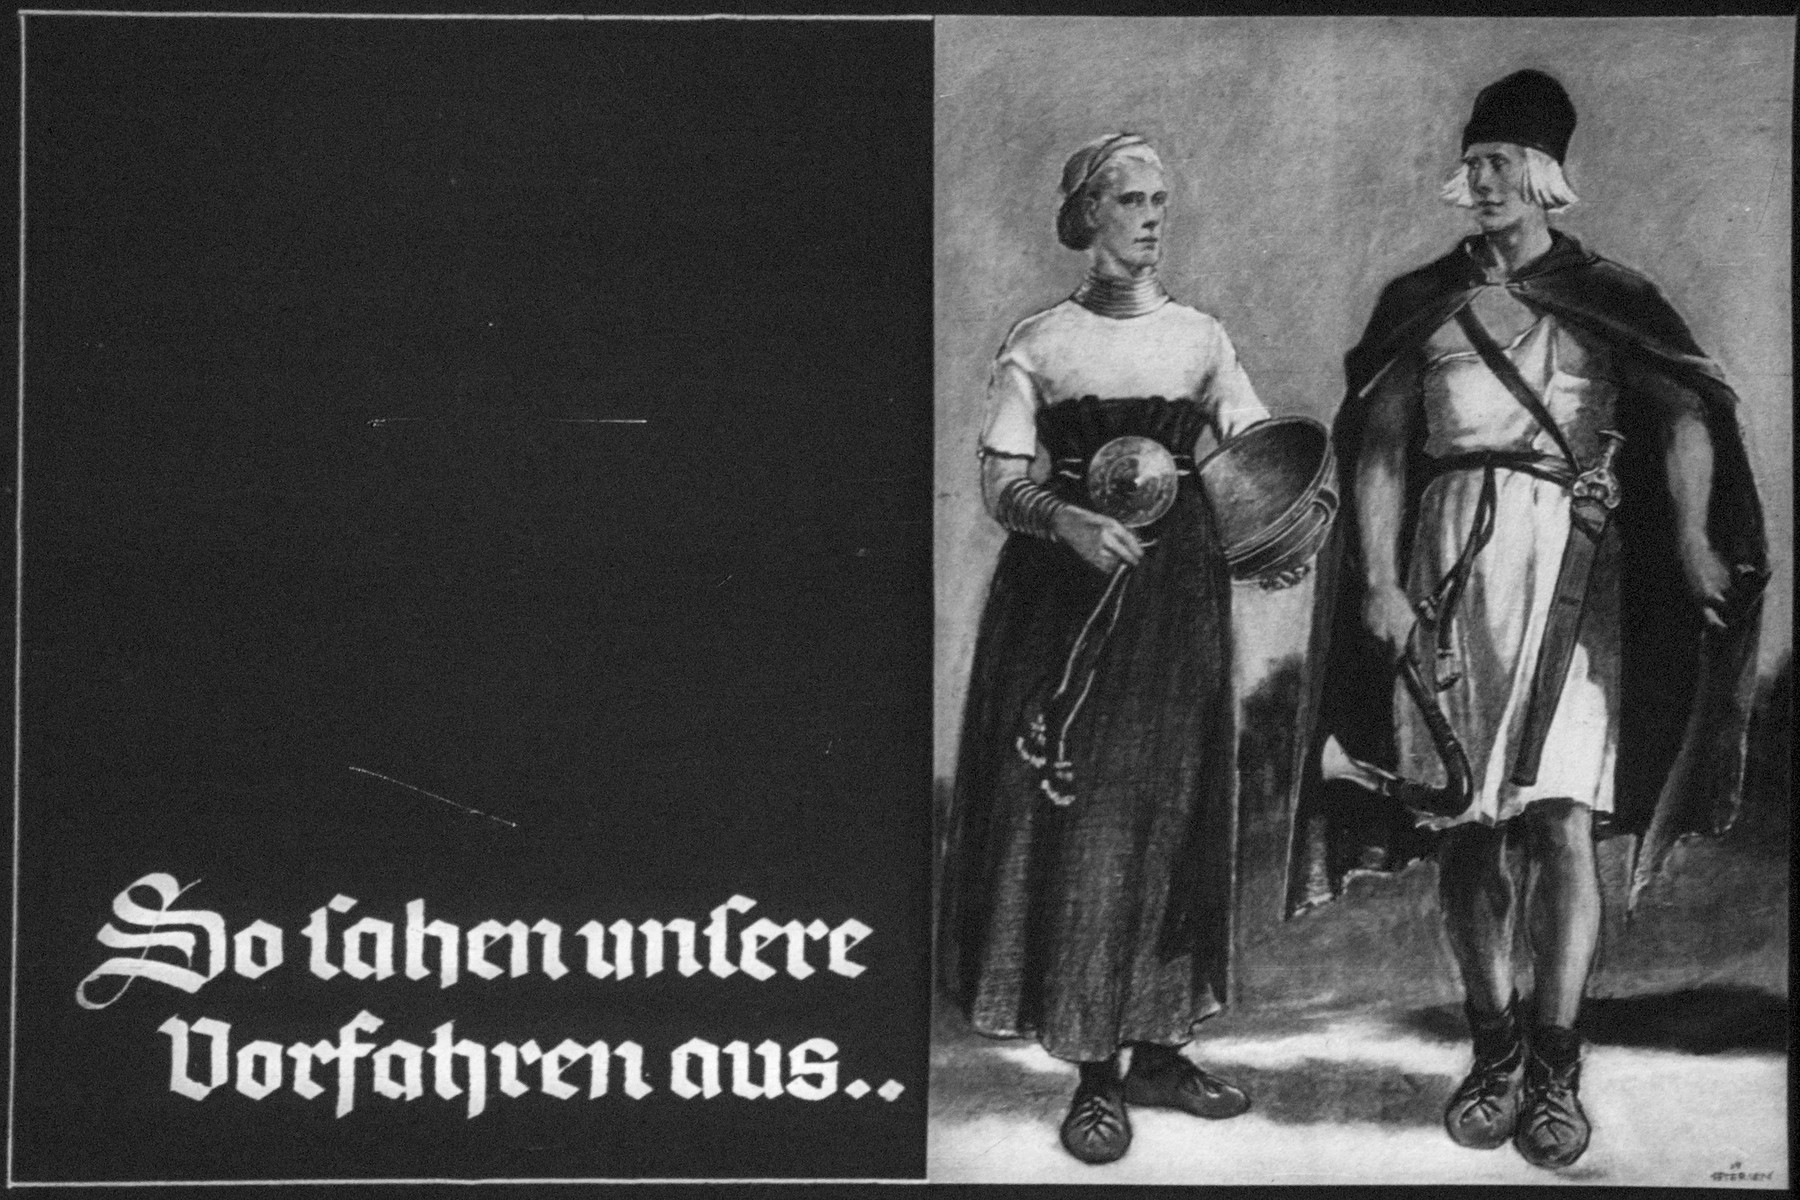 15th Nazi propaganda slide for a Hitler Youth educational presentation entitled "5000 years of German Culture."
So ashen unsere Vorfahen aus...
//
This is how our ancestors looked...